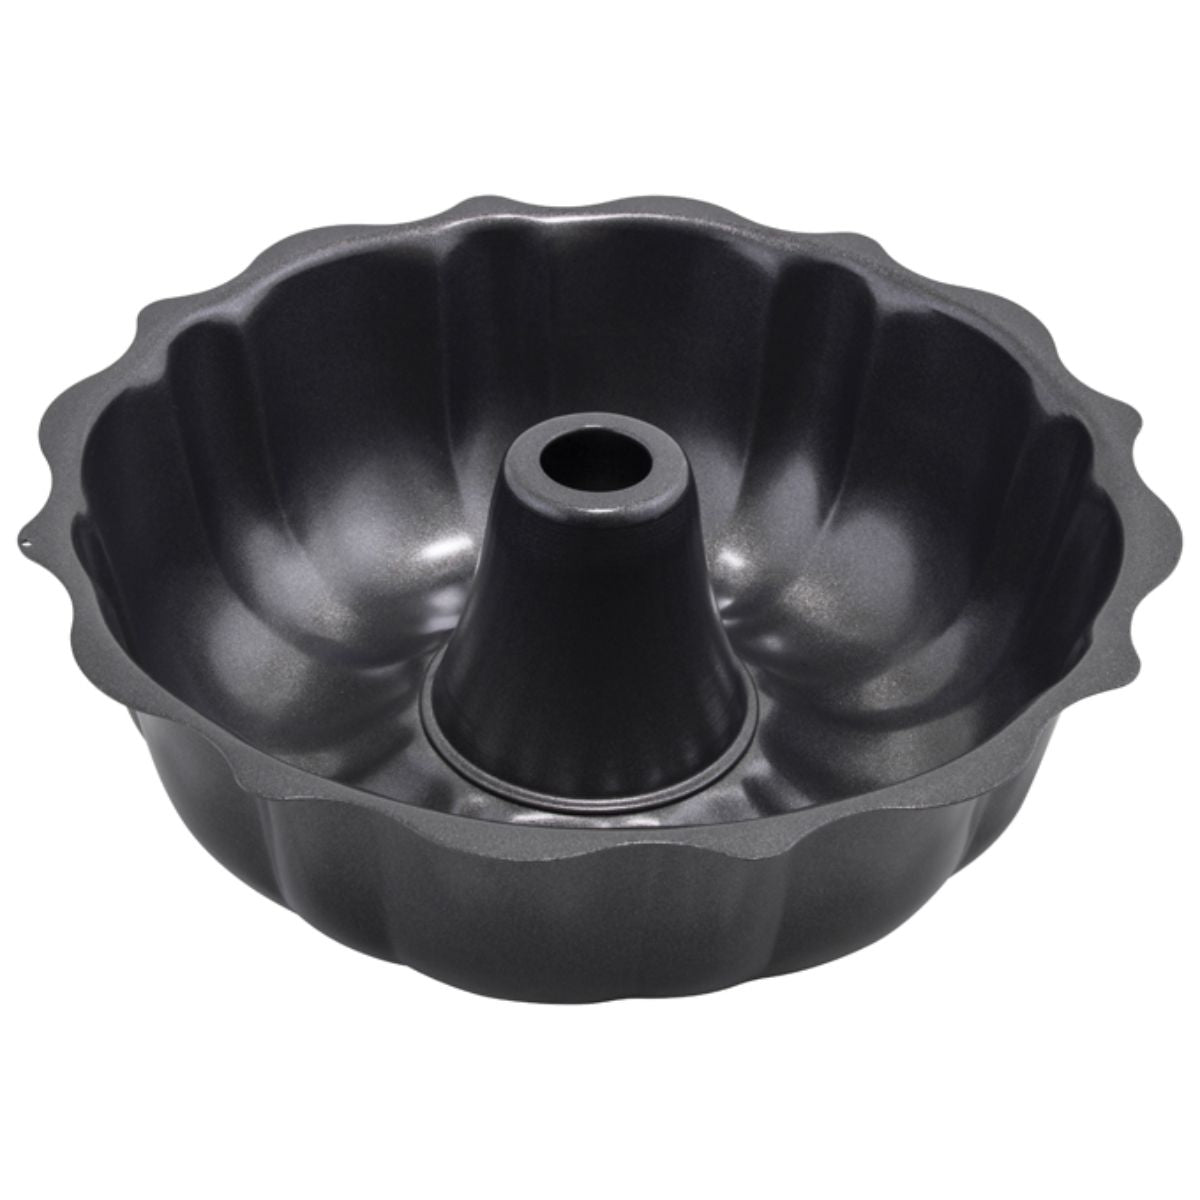 Nordic Ware Deluxe Bundt Cake Keeper Holder Twist And Lock Dome